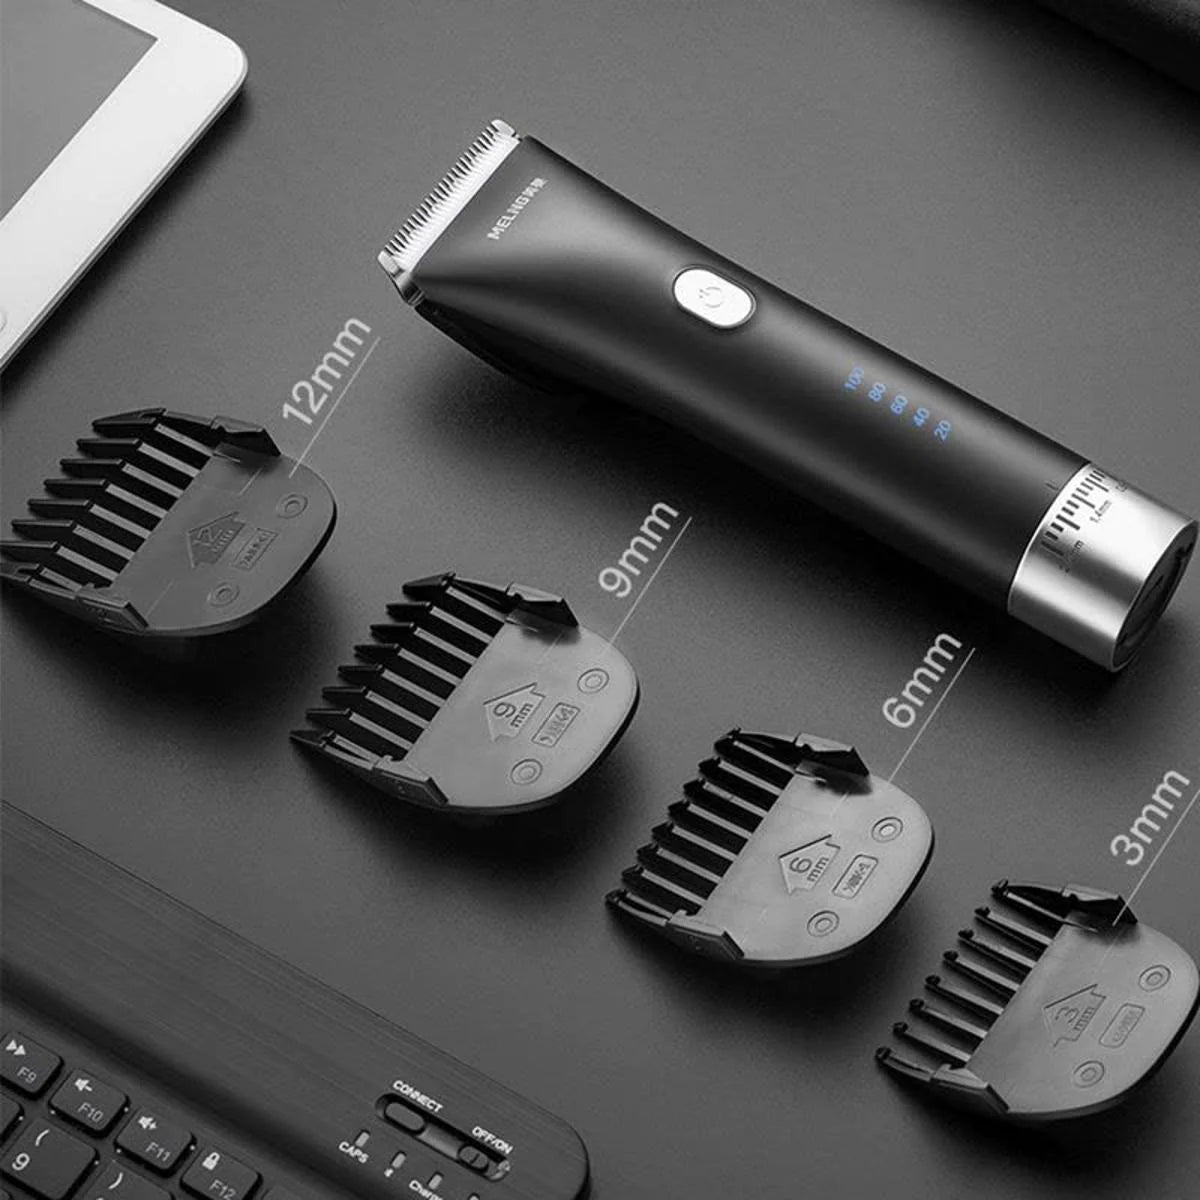 ORIGINAL MELING M-L22 HAIR TRIMMER AND BEARD CLIPPER FOR MEN_PROFESSIONAL RECHARGEABLE ELECTRIC HAIR SHAVING